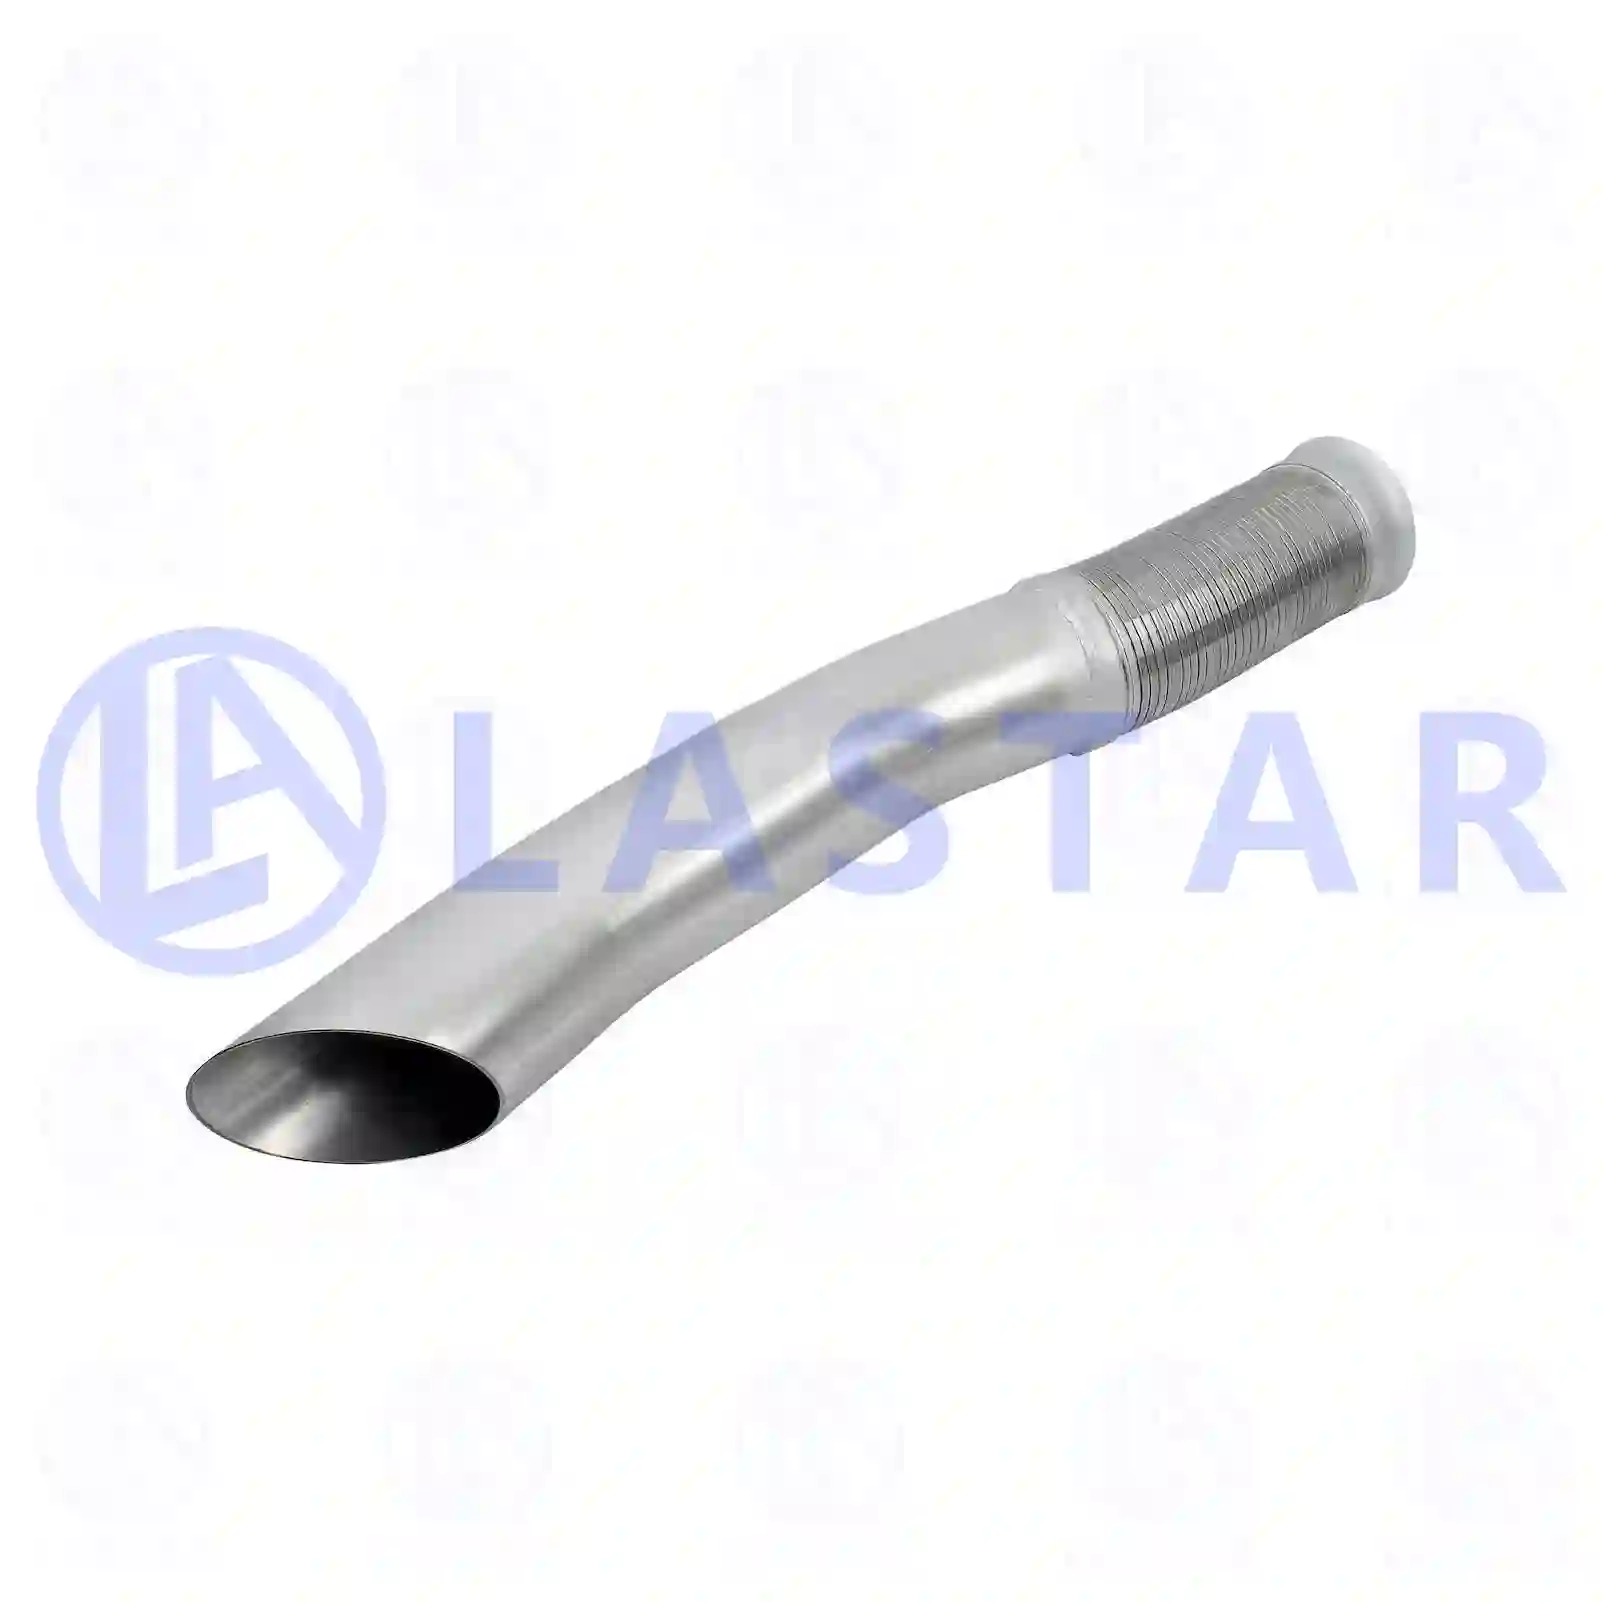 Exhaust pipe, 77706409, 9304900419 ||  77706409 Lastar Spare Part | Truck Spare Parts, Auotomotive Spare Parts Exhaust pipe, 77706409, 9304900419 ||  77706409 Lastar Spare Part | Truck Spare Parts, Auotomotive Spare Parts